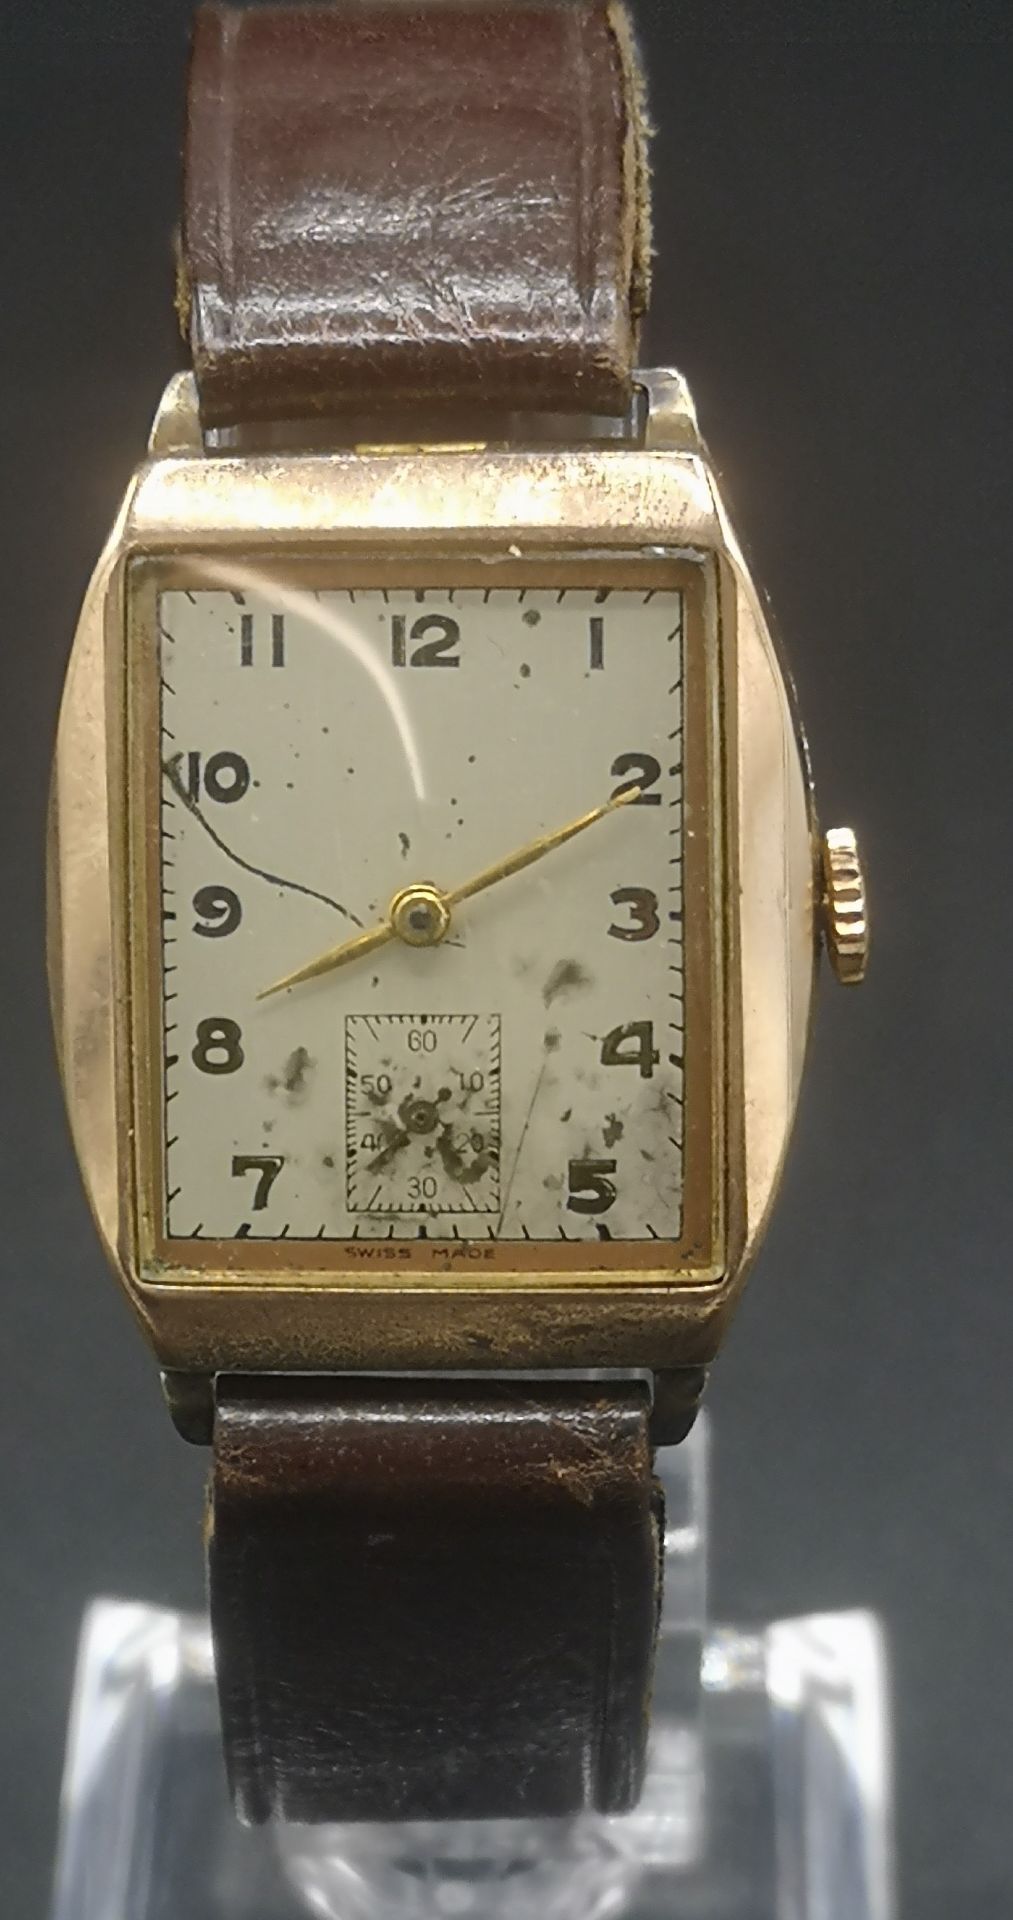 Gents wrist watch in 9ct gold case - Image 6 of 9